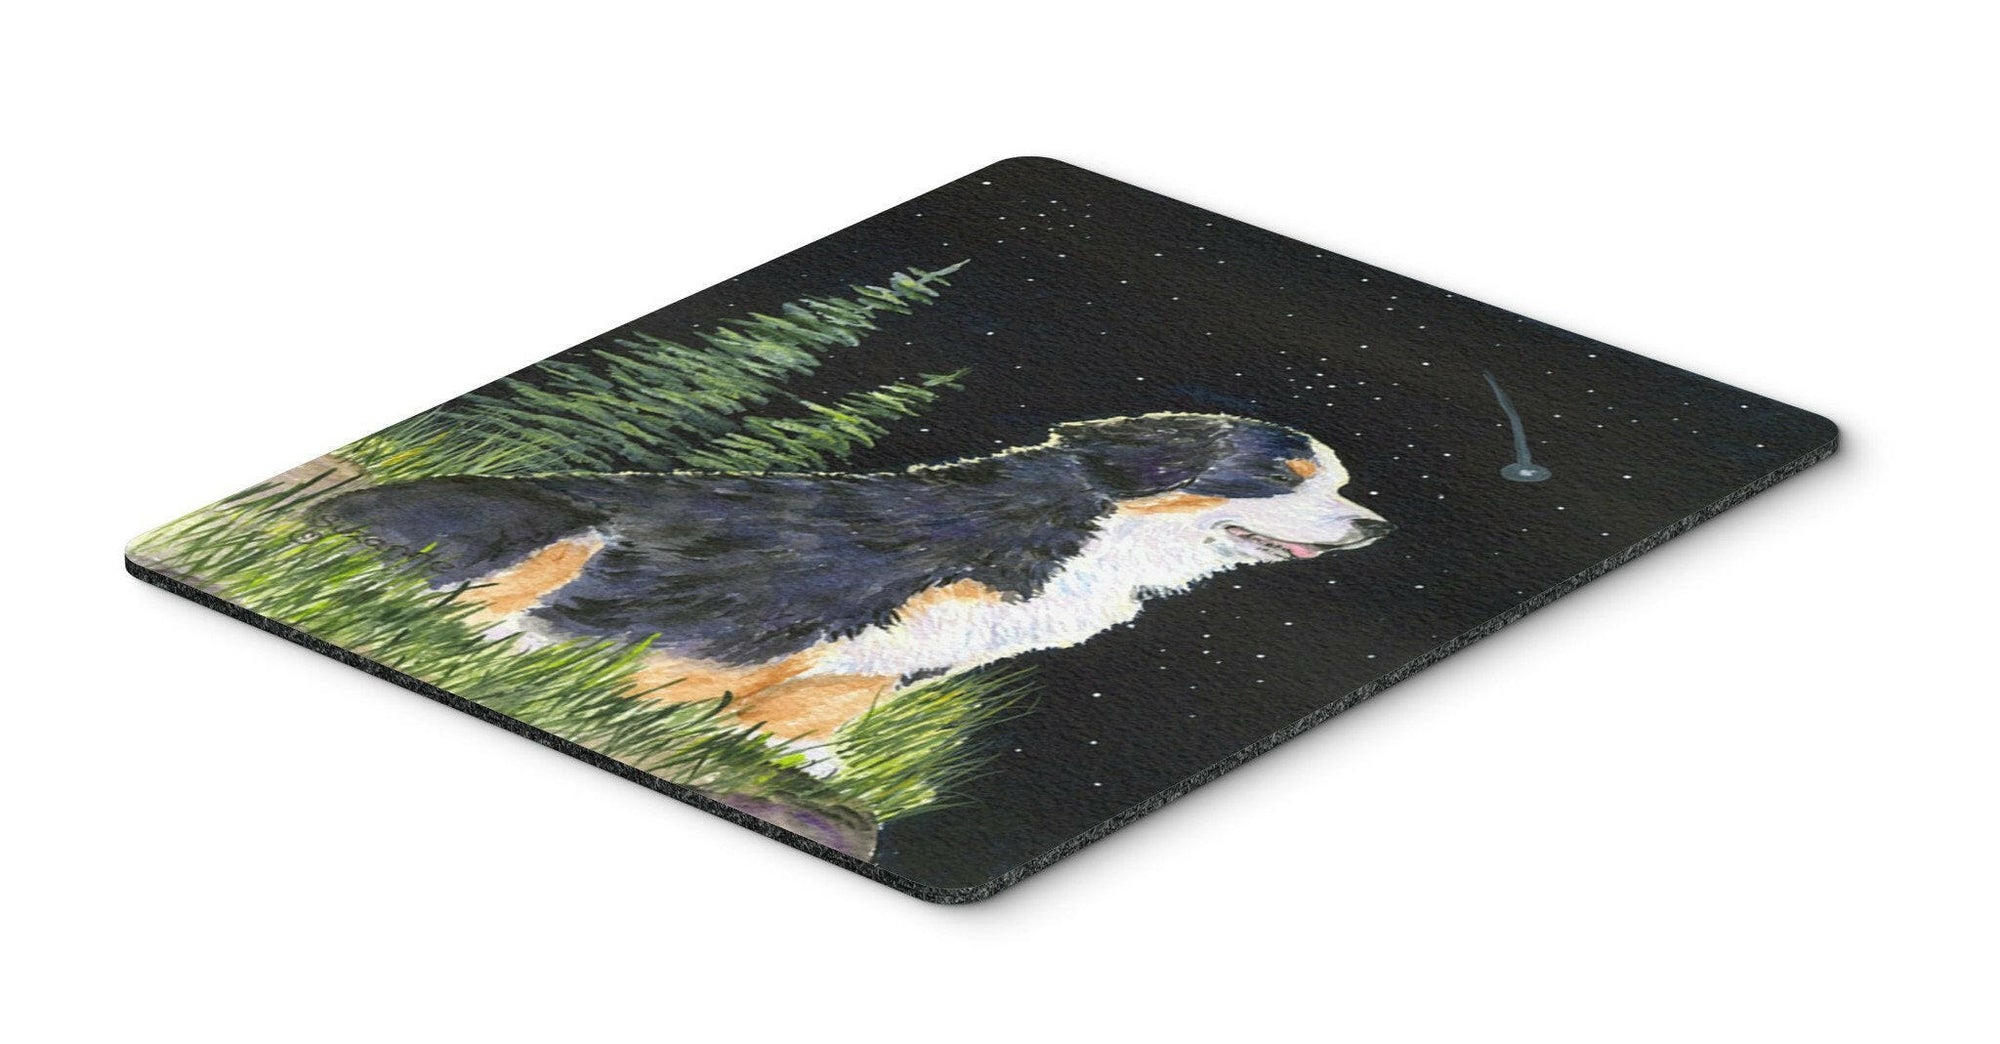 Starry Night Bernese Mountain Dog Mouse Pad / Hot Pad / Trivet by Caroline's Treasures